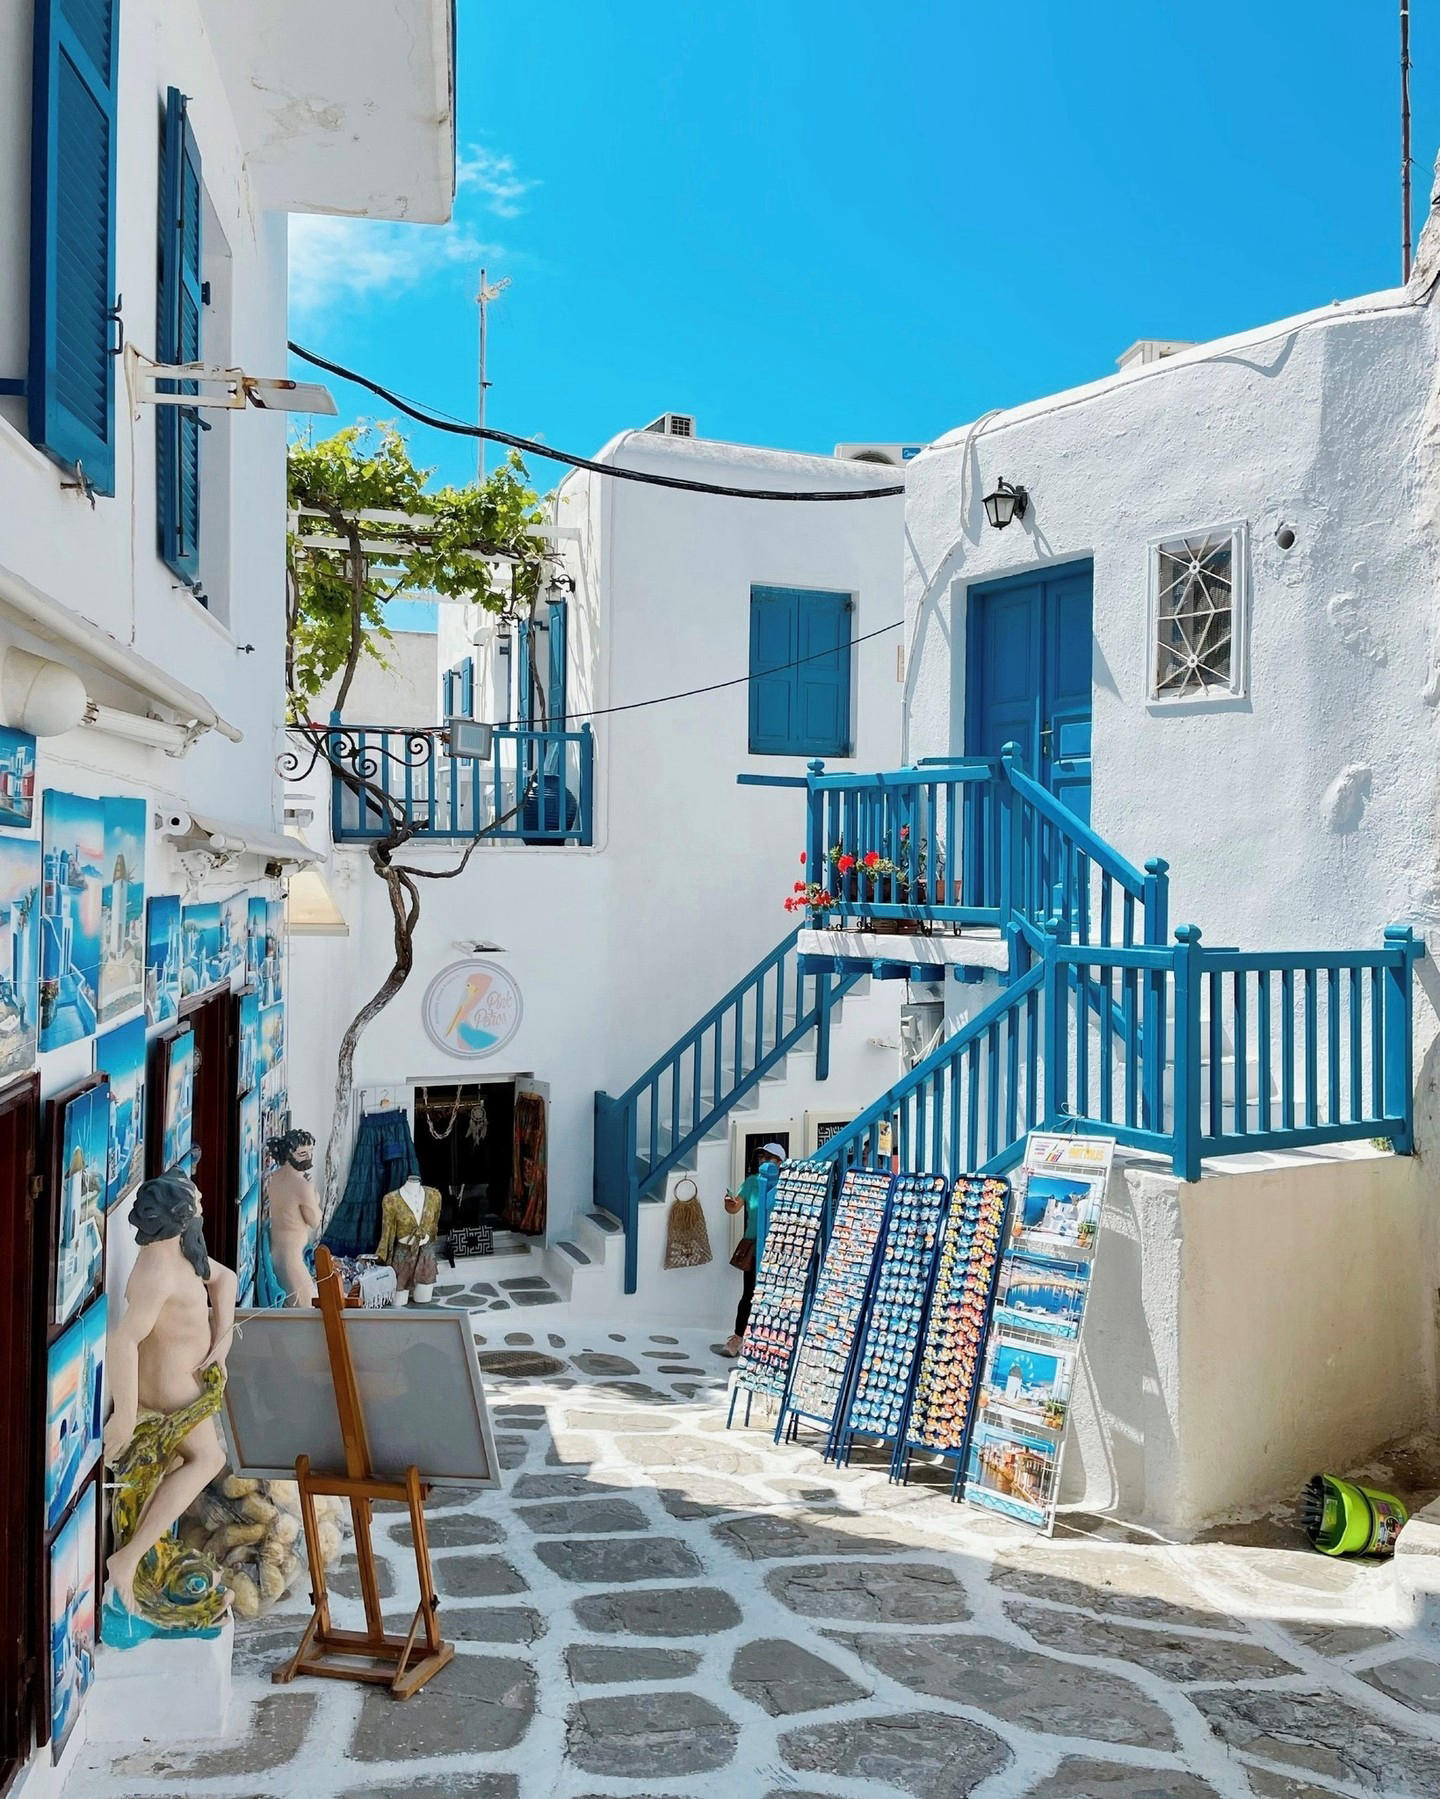 image  1 Make Mykonos this year’s holiday destination of choice and give yourself something blue-tiful to loo